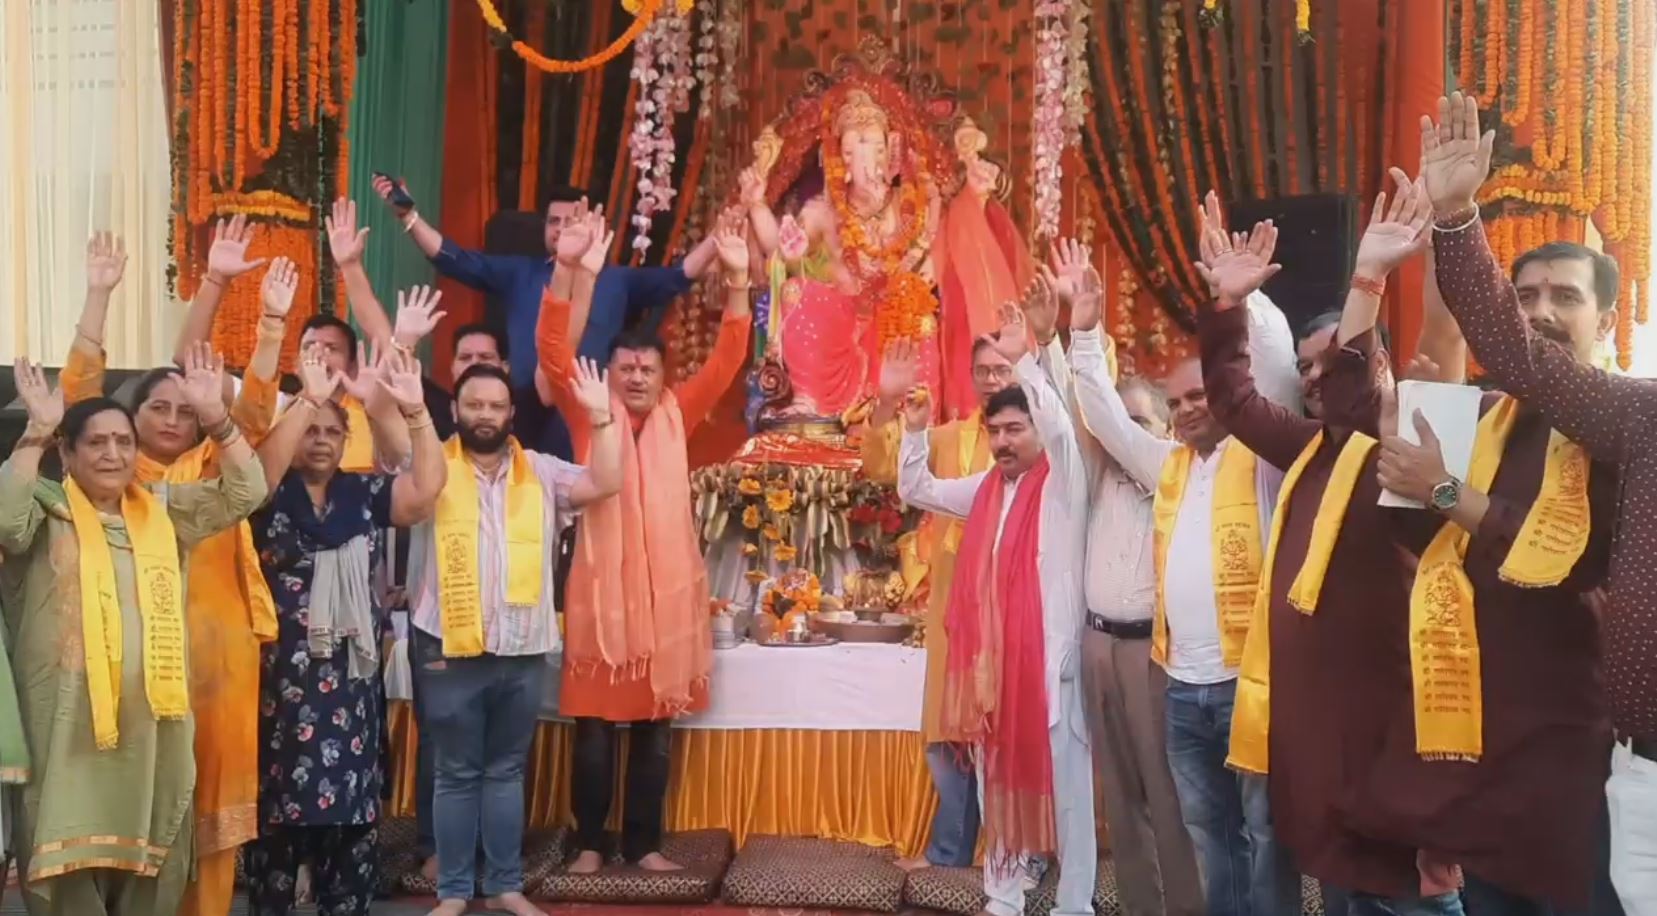 Shri Ganesh Mahotsav is being celebrated with great pomp in Mohali